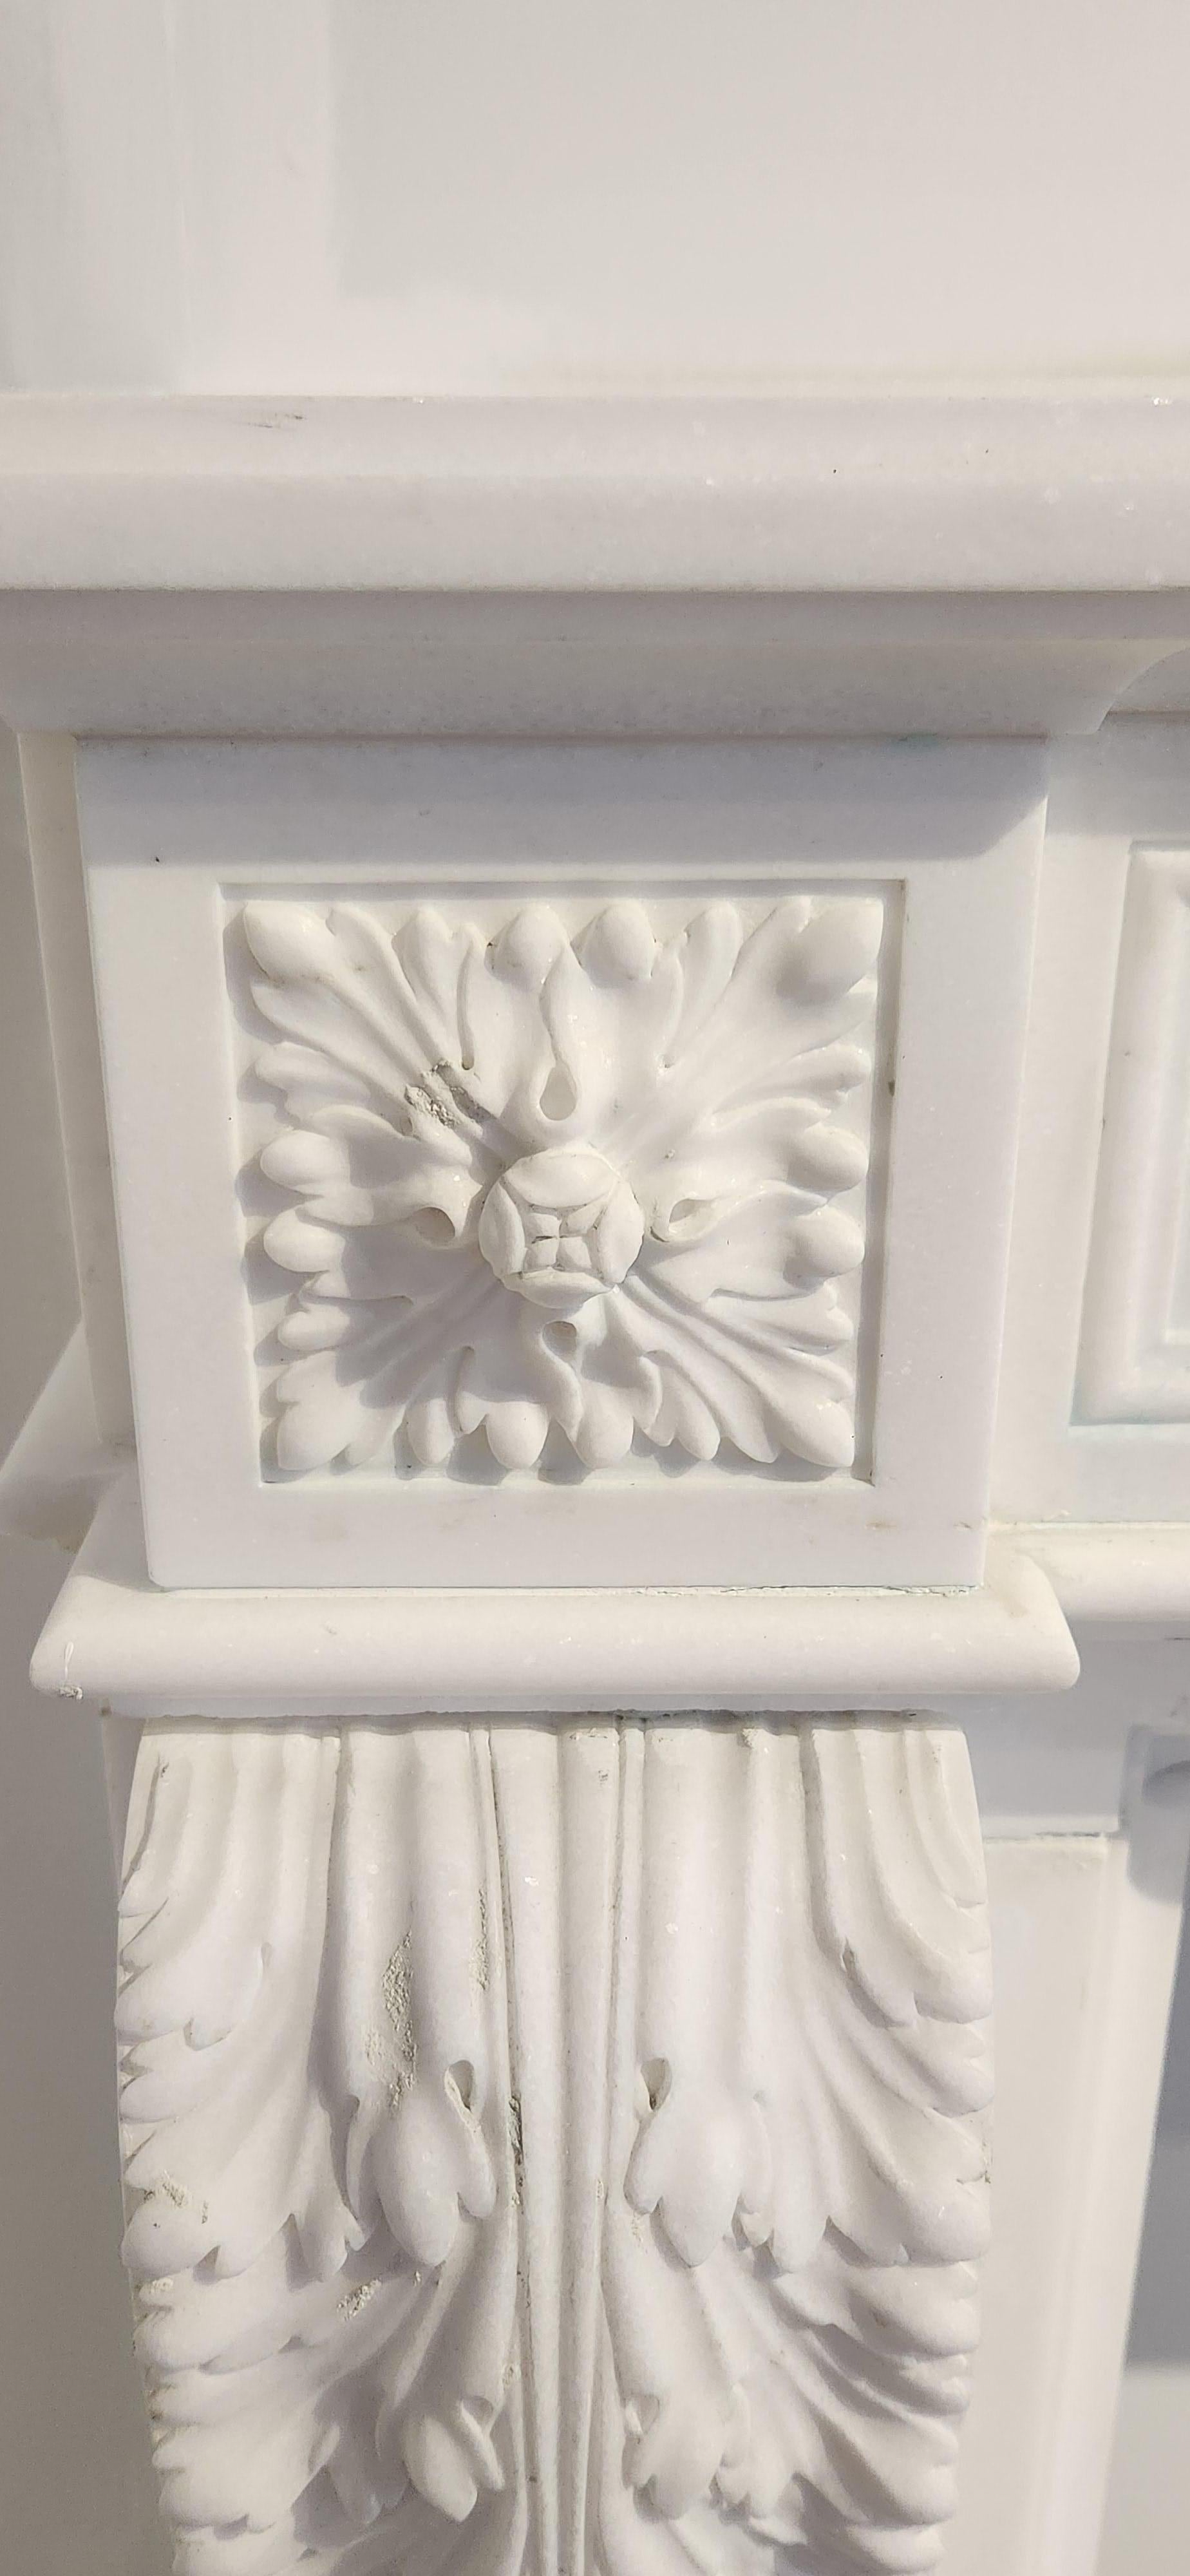 This gorgeous Regency-style fireplace mantel is hand-carved in beautiful white marble. The marble is a bright white, and is very clean, with virtually no veining. The hand-carved details on the fireplace include an intricately-carved wreath and